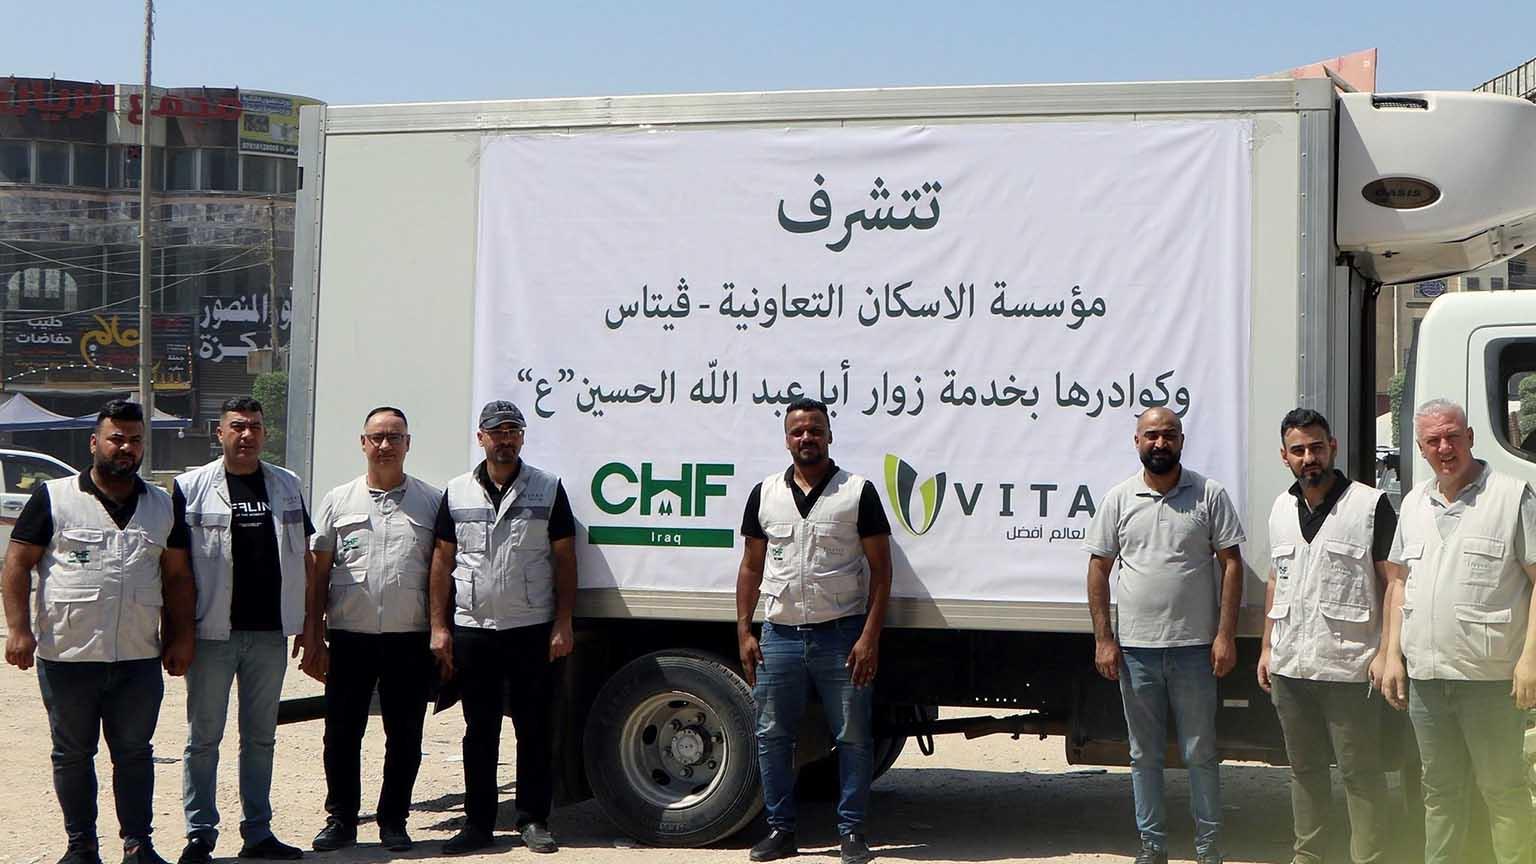 community events - Distribution of 12,000 juice boxes to visitors during the “Arba'ein”